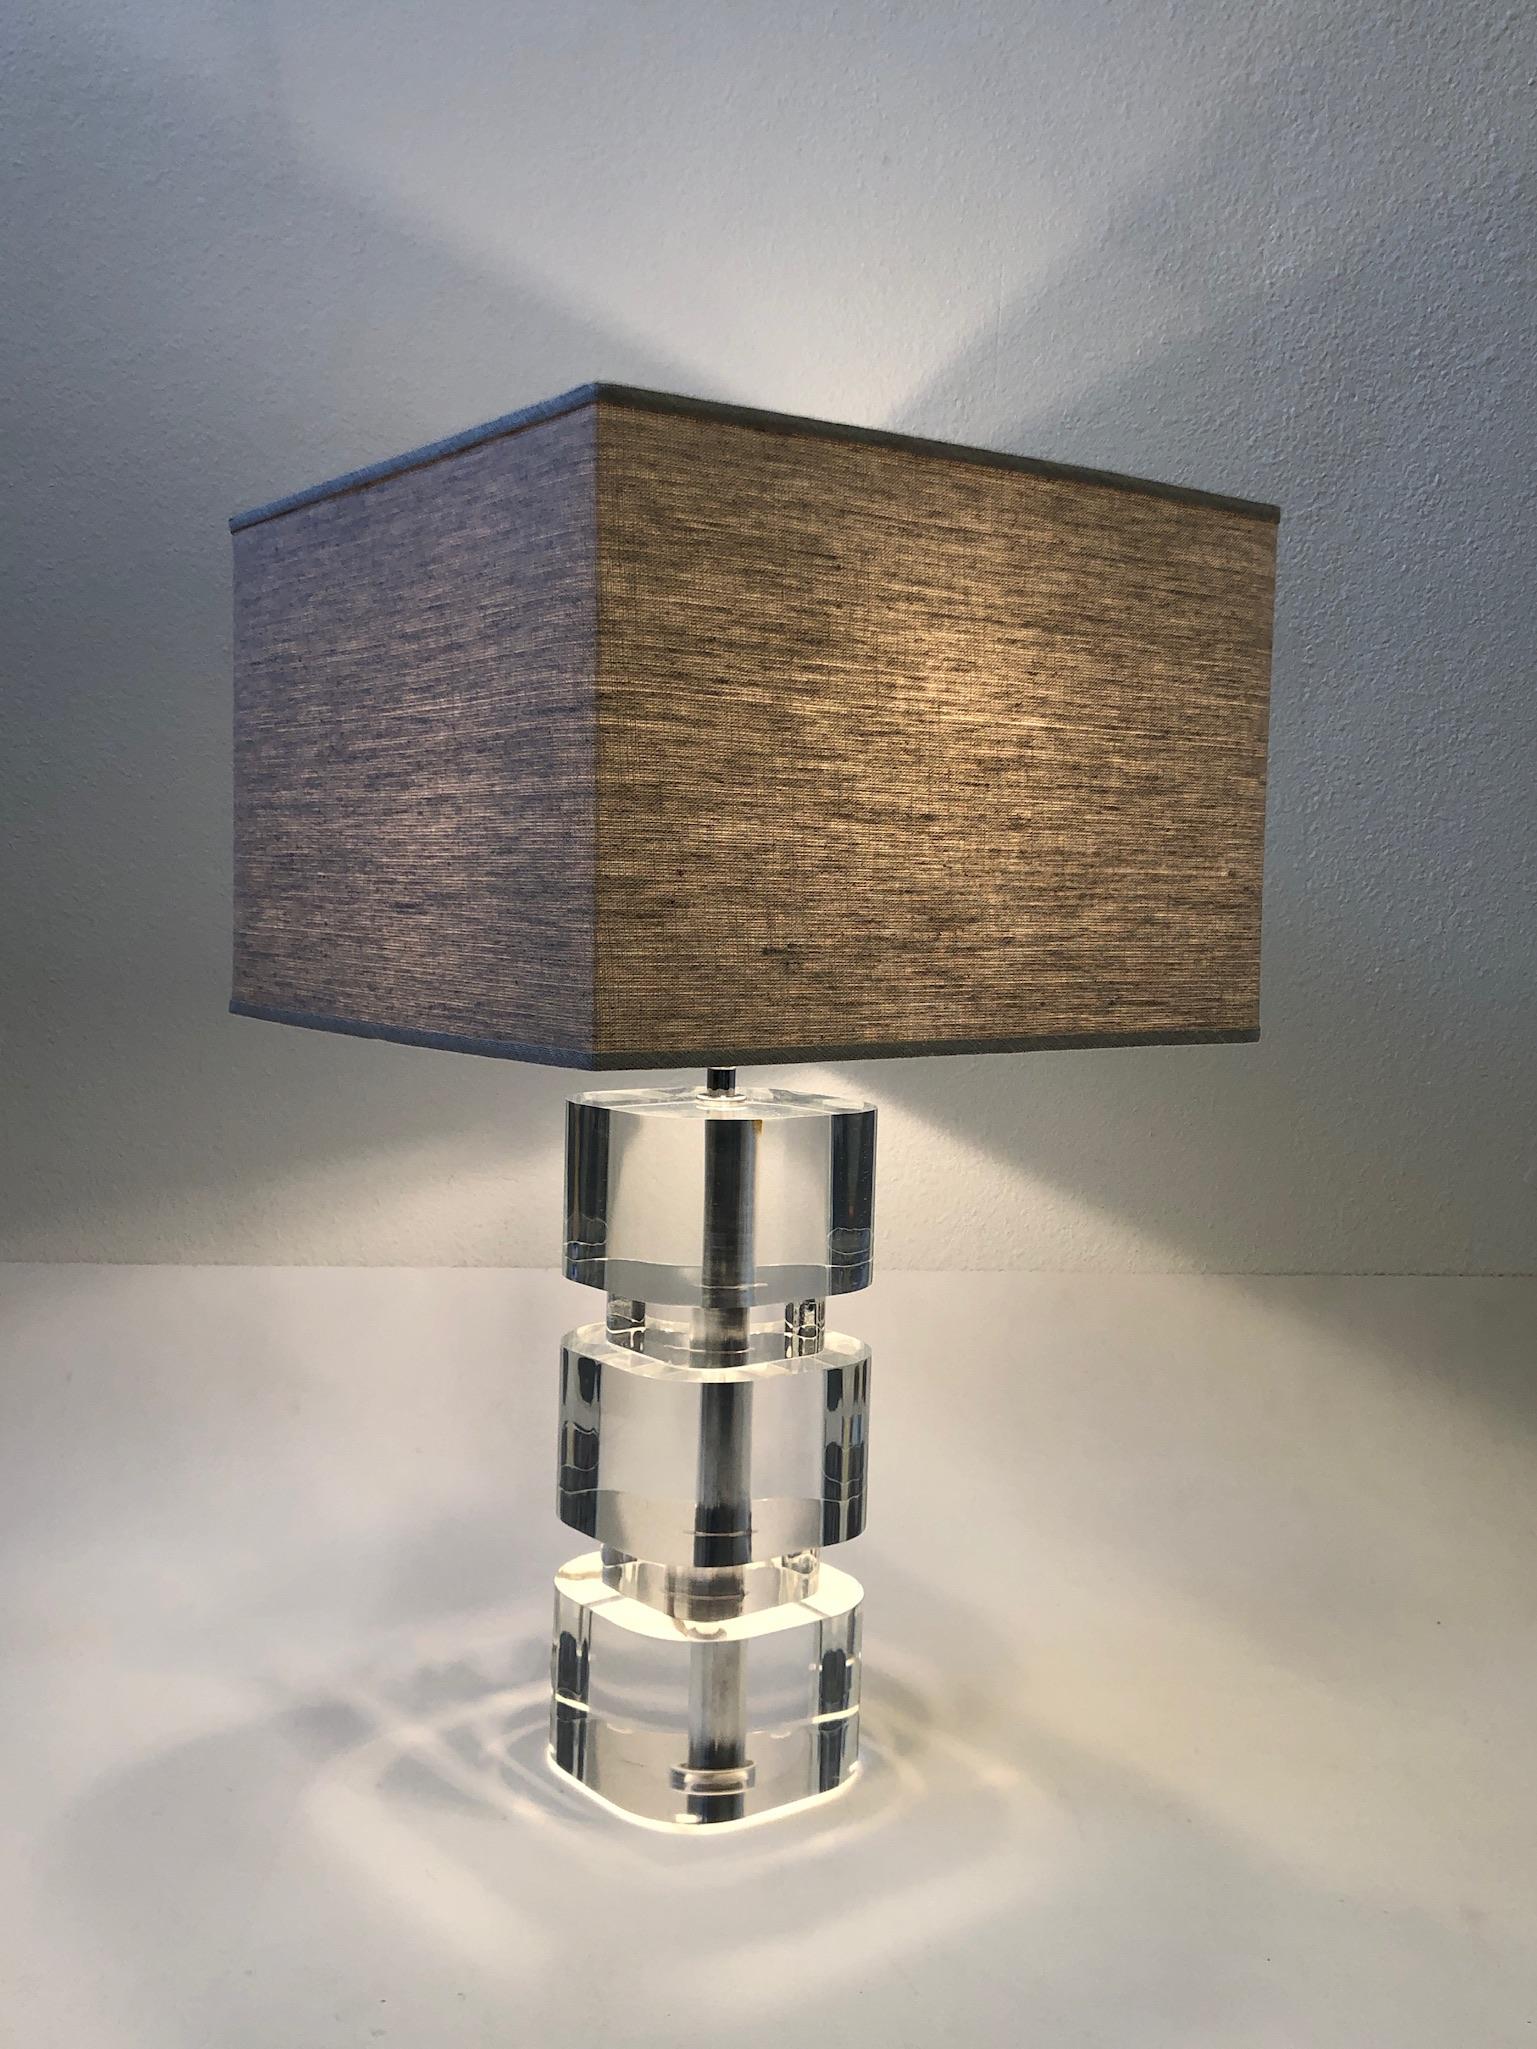 1980s glamorous clear Lucite and polish chrome table lamp by renowned American designer Karl Springer. Newly rewired and new oatmeal linen shade. The acrylic shows some crazing from age(see detail photos).
Measurements: 16” wide, 16” deep and 27”